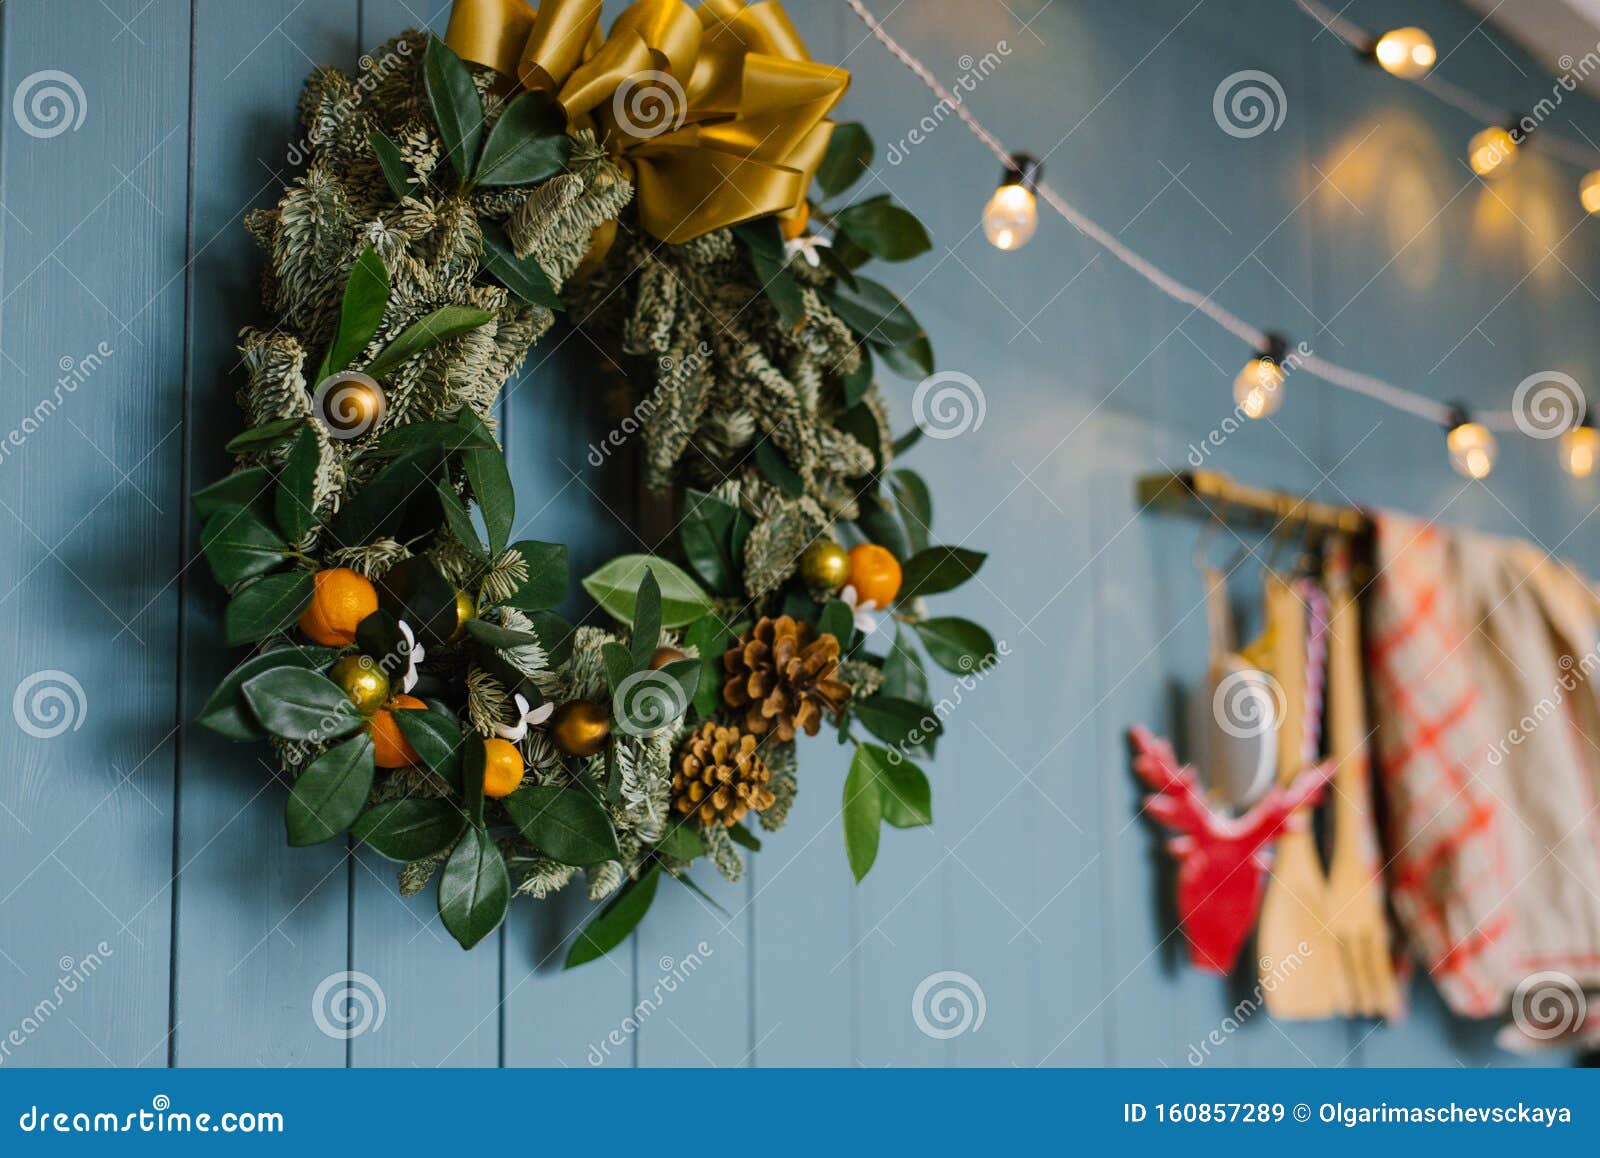 christmas wreath hanging on blue annoyance wall with lights on it, decor apartment or kitchen